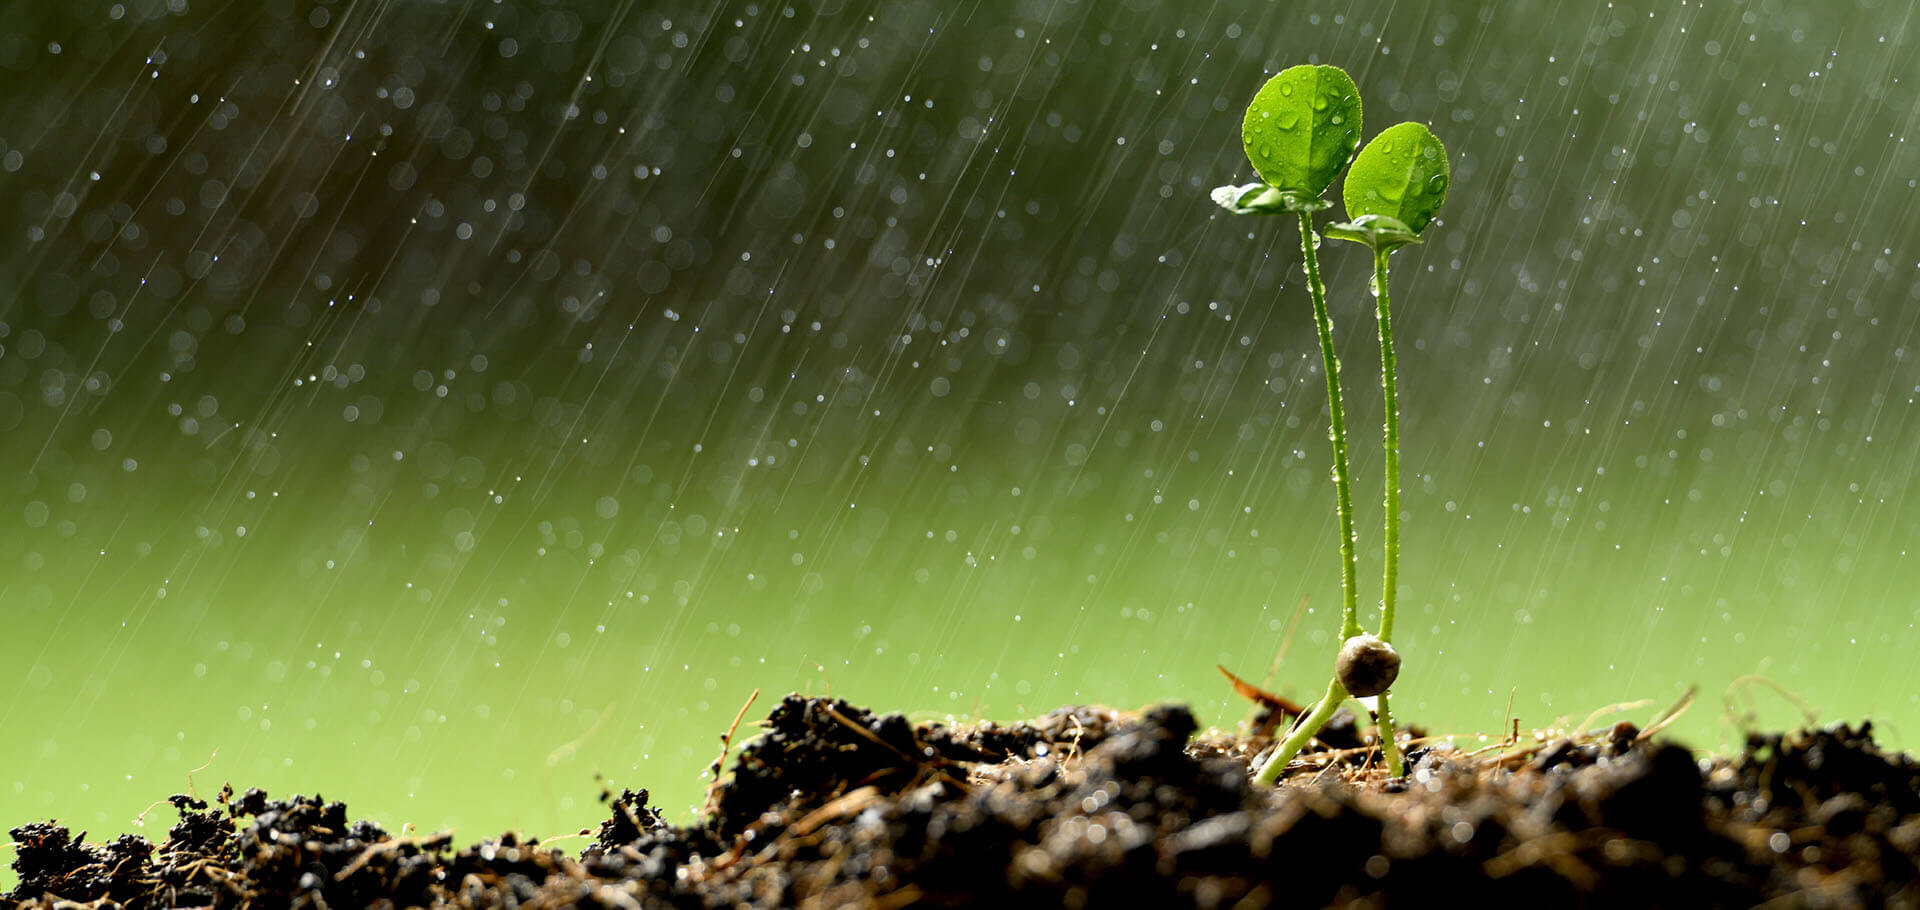 Young plants growing in rain_adobestock_236465247_featured image